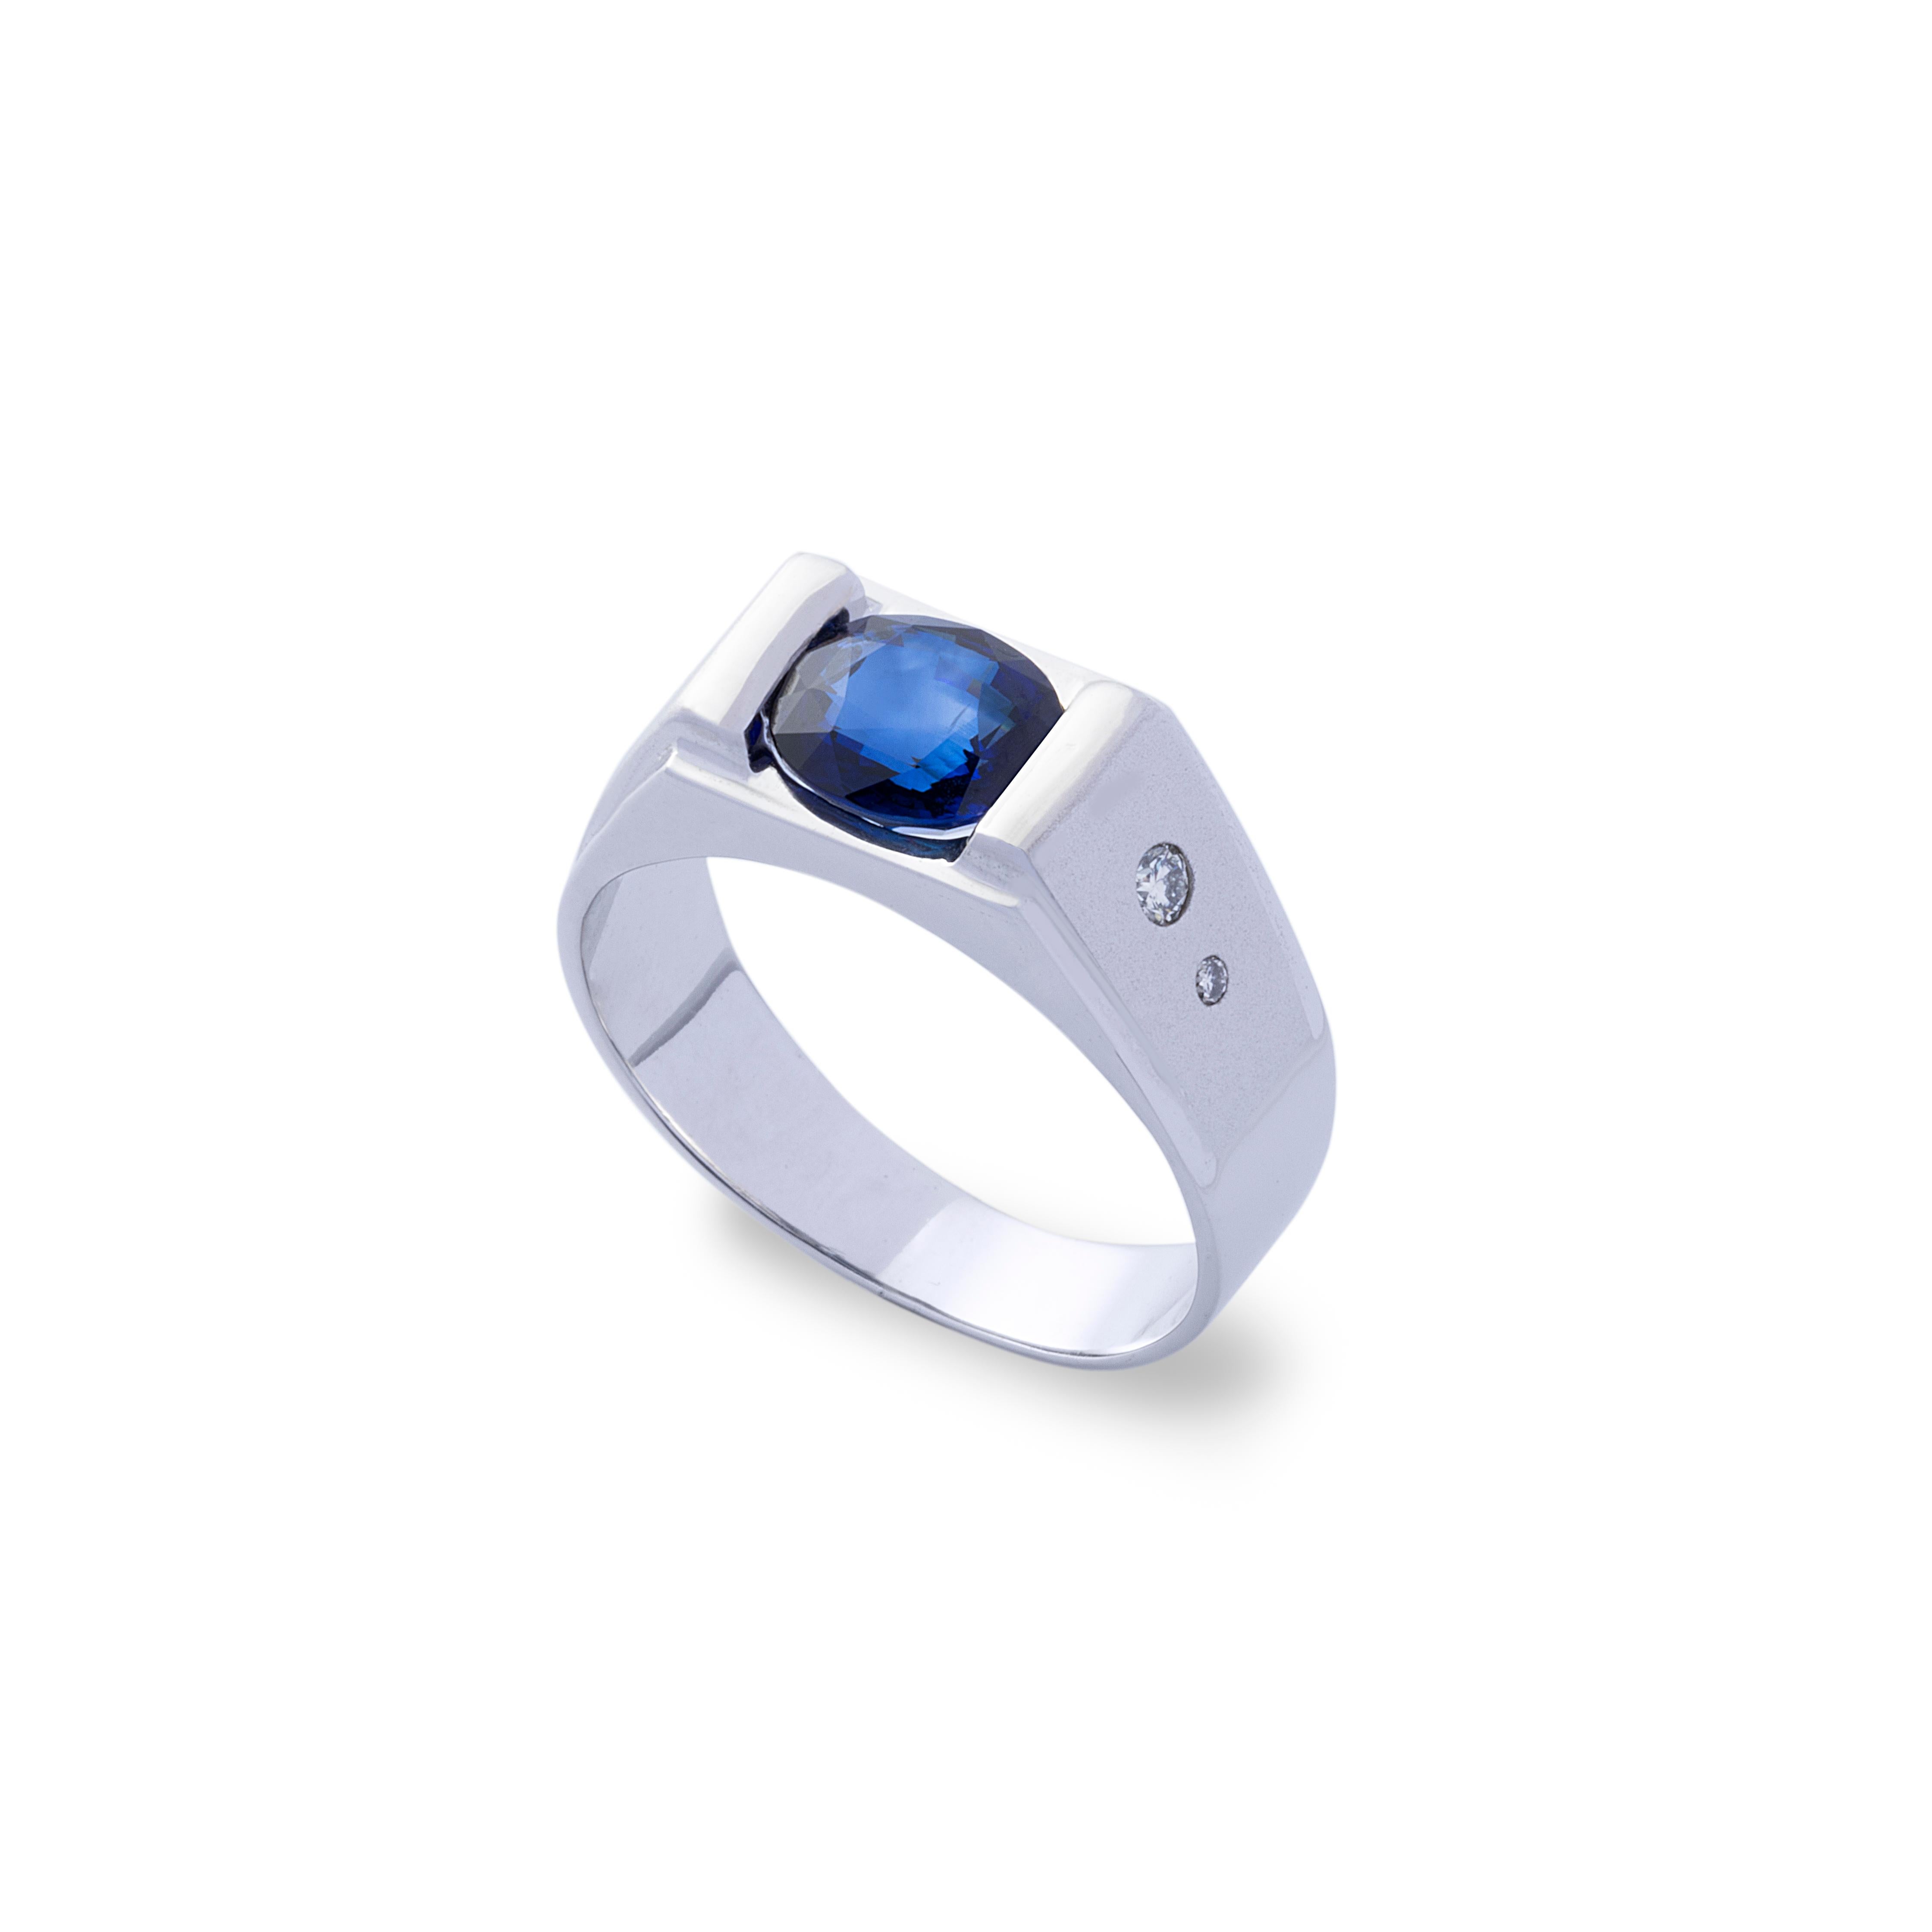 This beautiful men's ring boasts a very beautiful blue sapphire! There are 4 round brilliant diamonds with 2 bigger diamonds and 2 smaller diamond pair accenting the ring. On the accent of the ring where the diamonds are inlaid the gold texture is